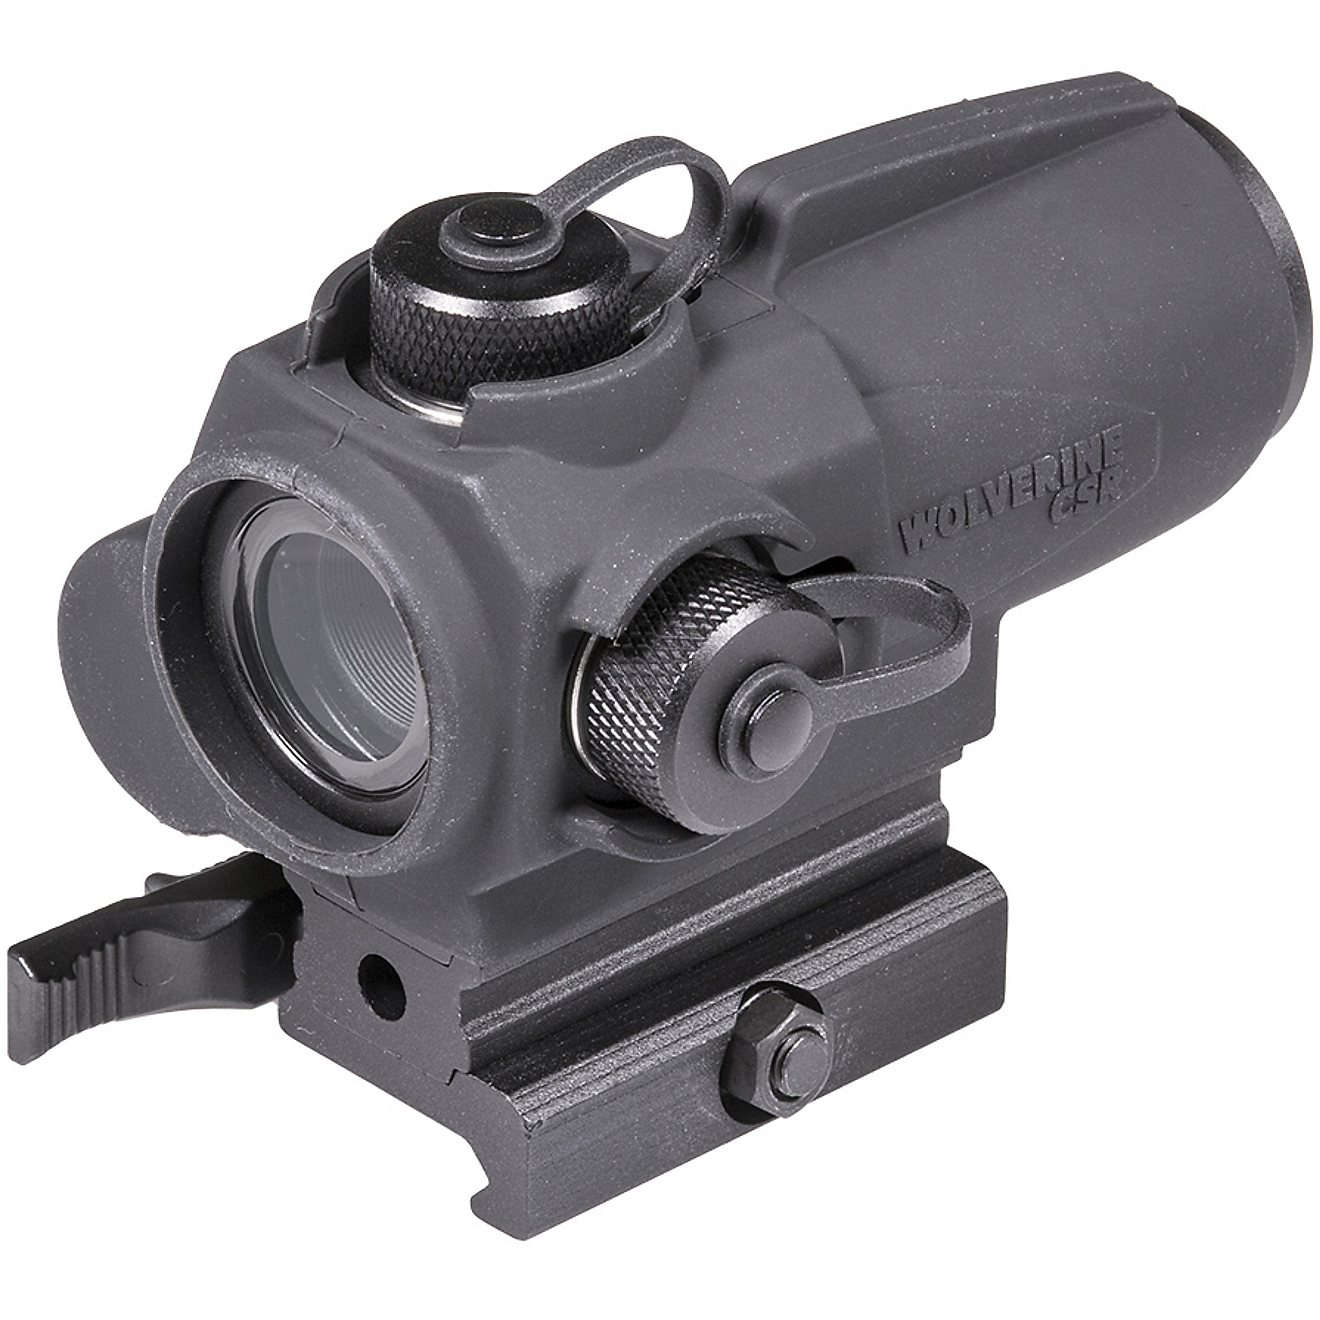 Sightmark Wolverine CSR Red Dot Sight                                                                                            - view number 4